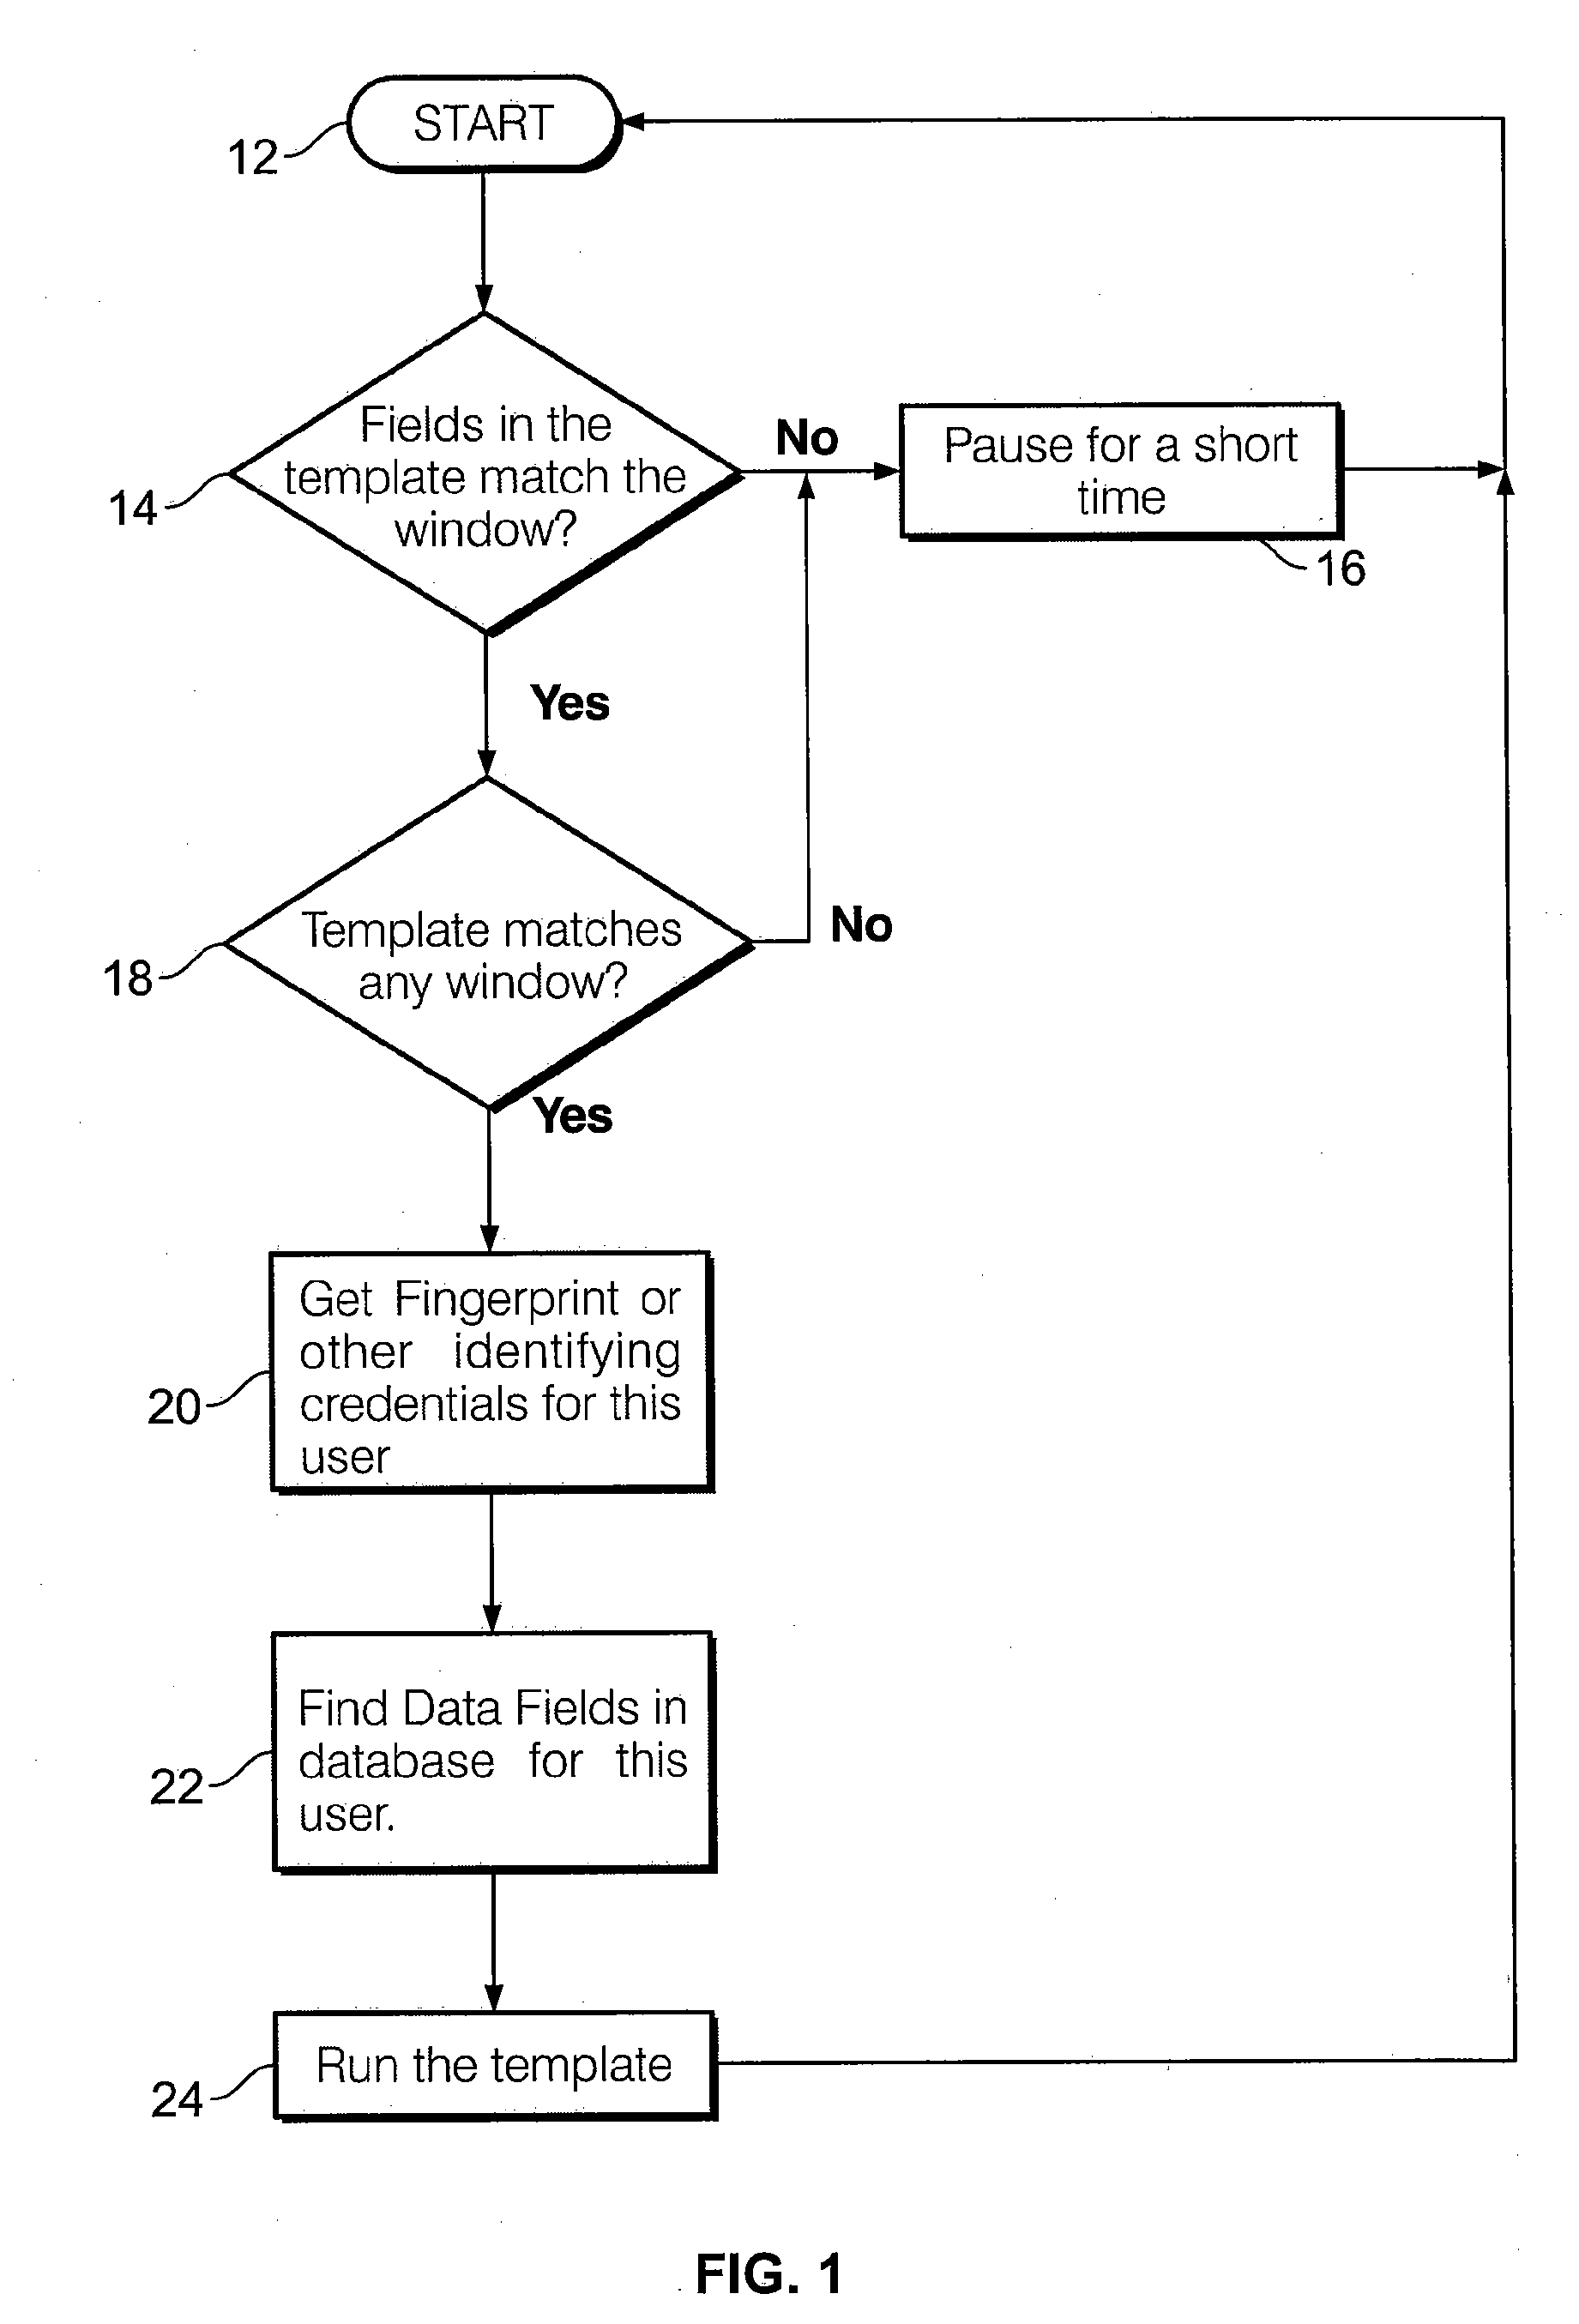 System and Method for Adding Biometric Functionality to an Application and Controlling and Managing Passwords